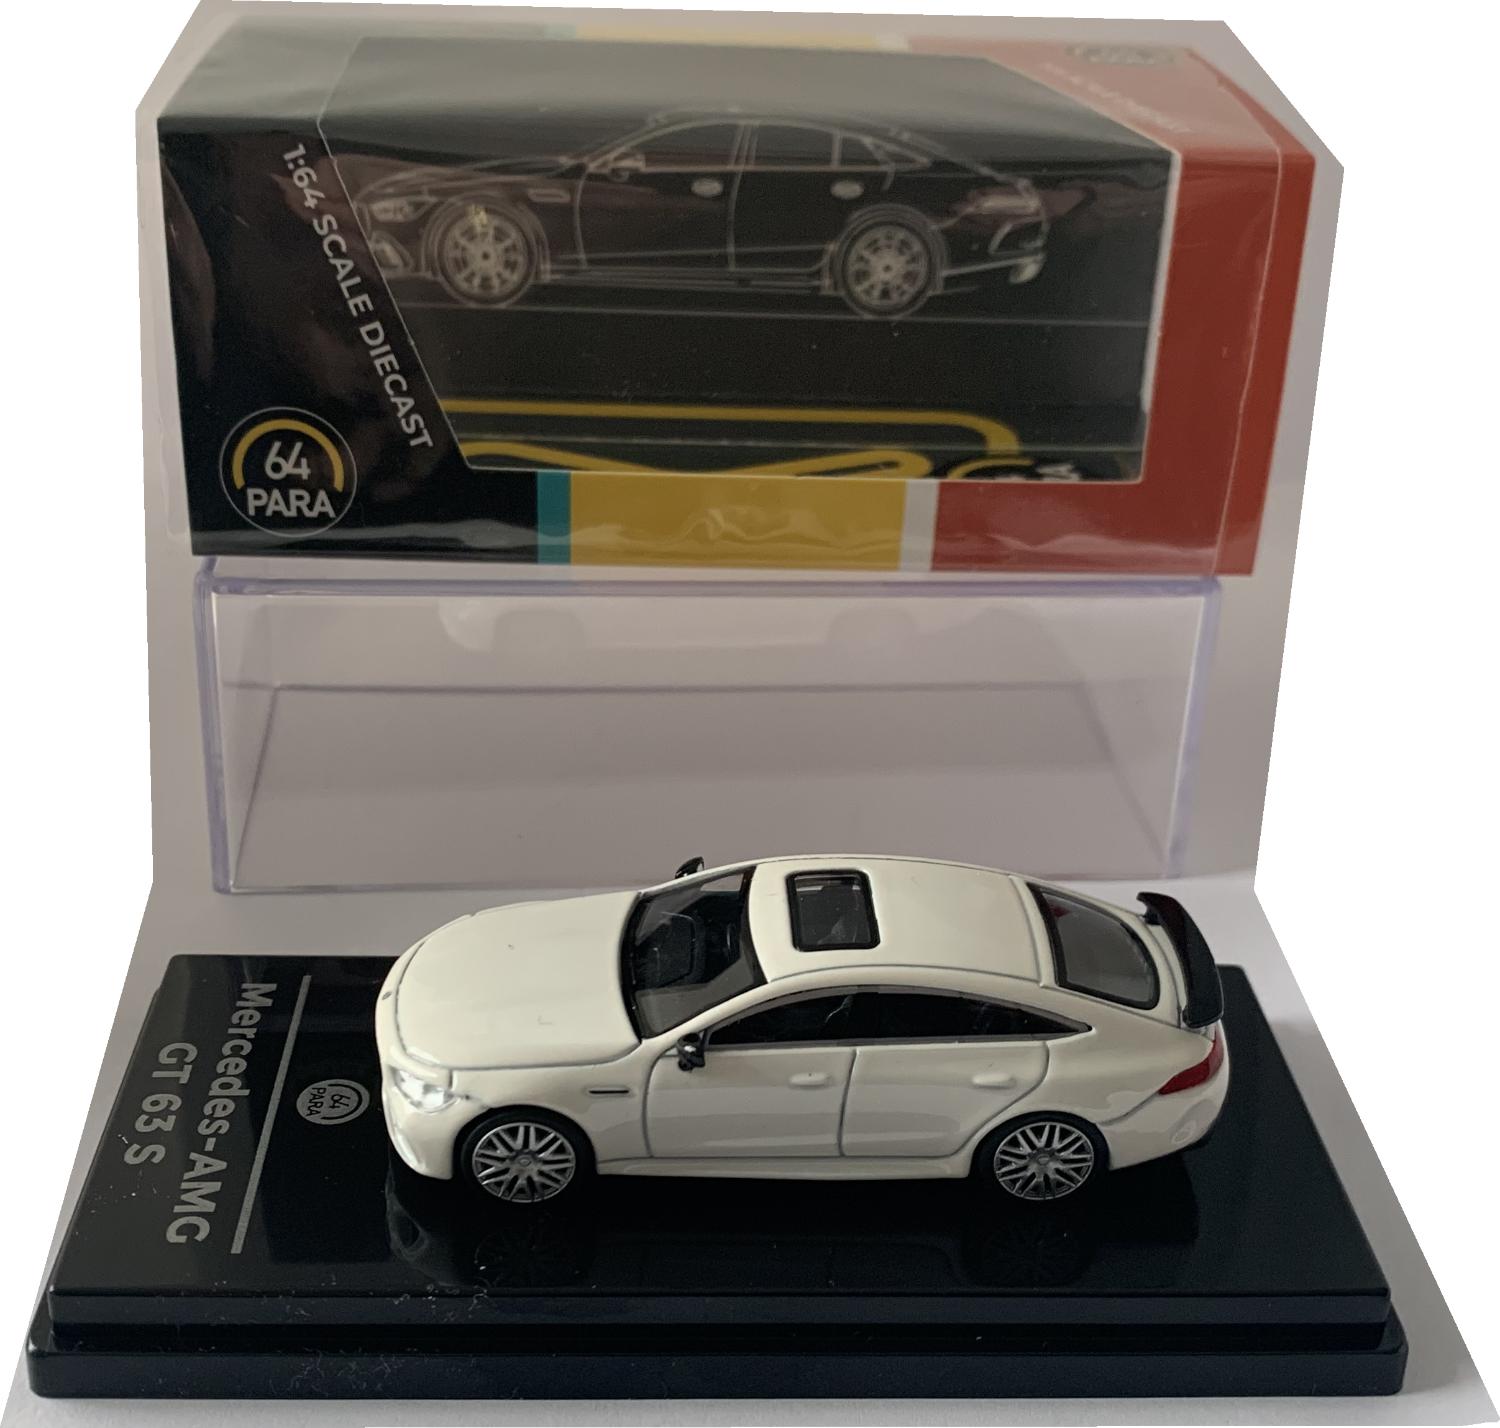 Mercedes AMG GT 63 S in white 1:64 scale model from Paragon Models